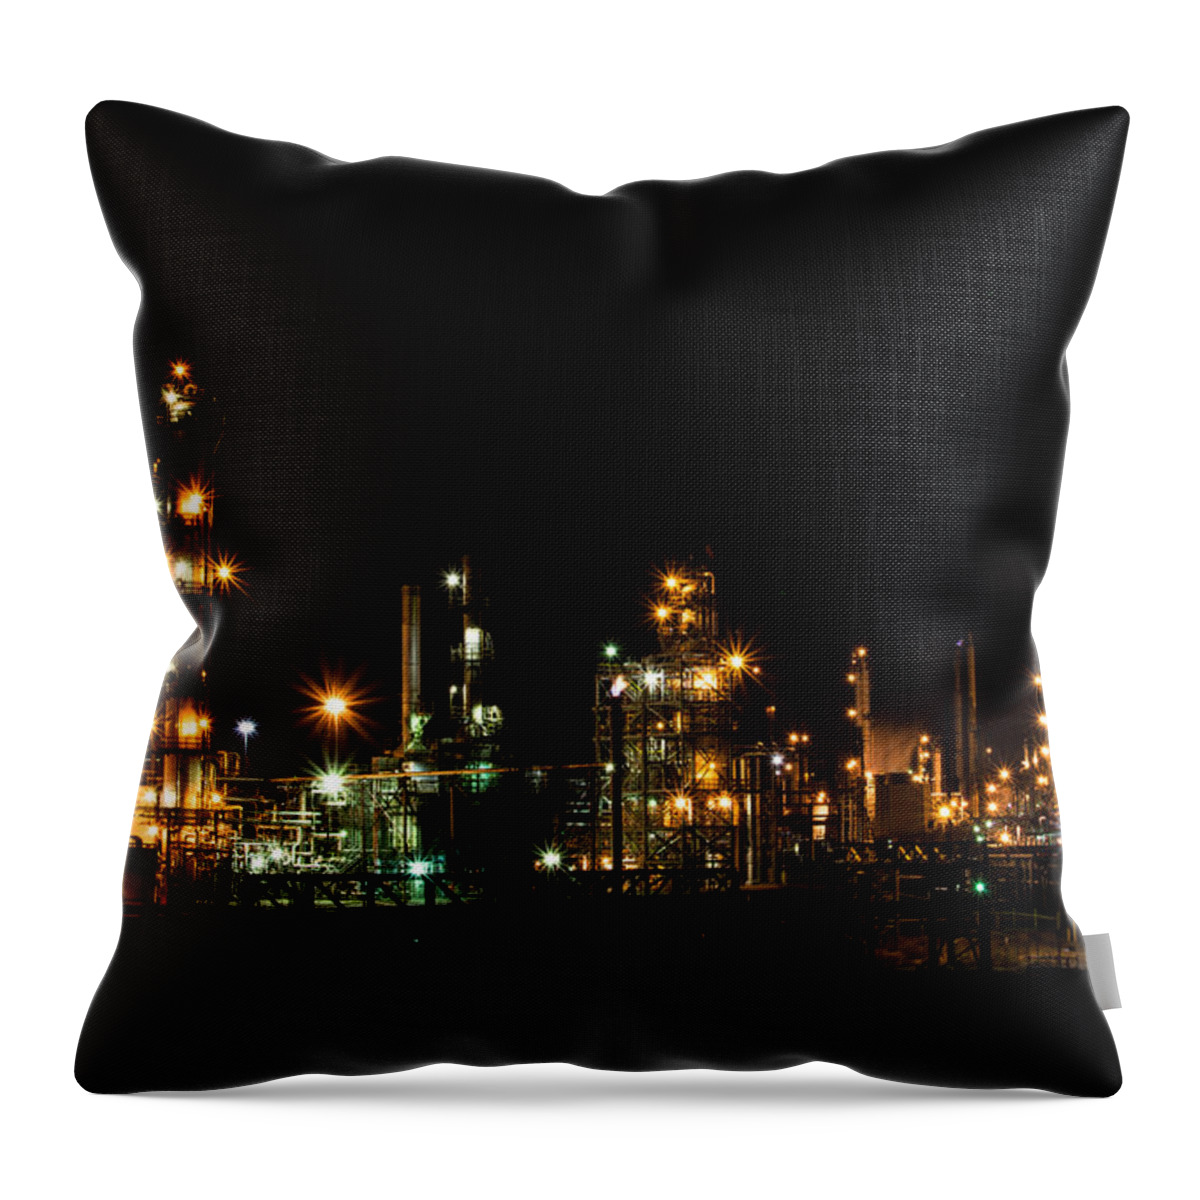 Refinery Throw Pillow featuring the photograph Refinery At Night 2 by Stephen Holst